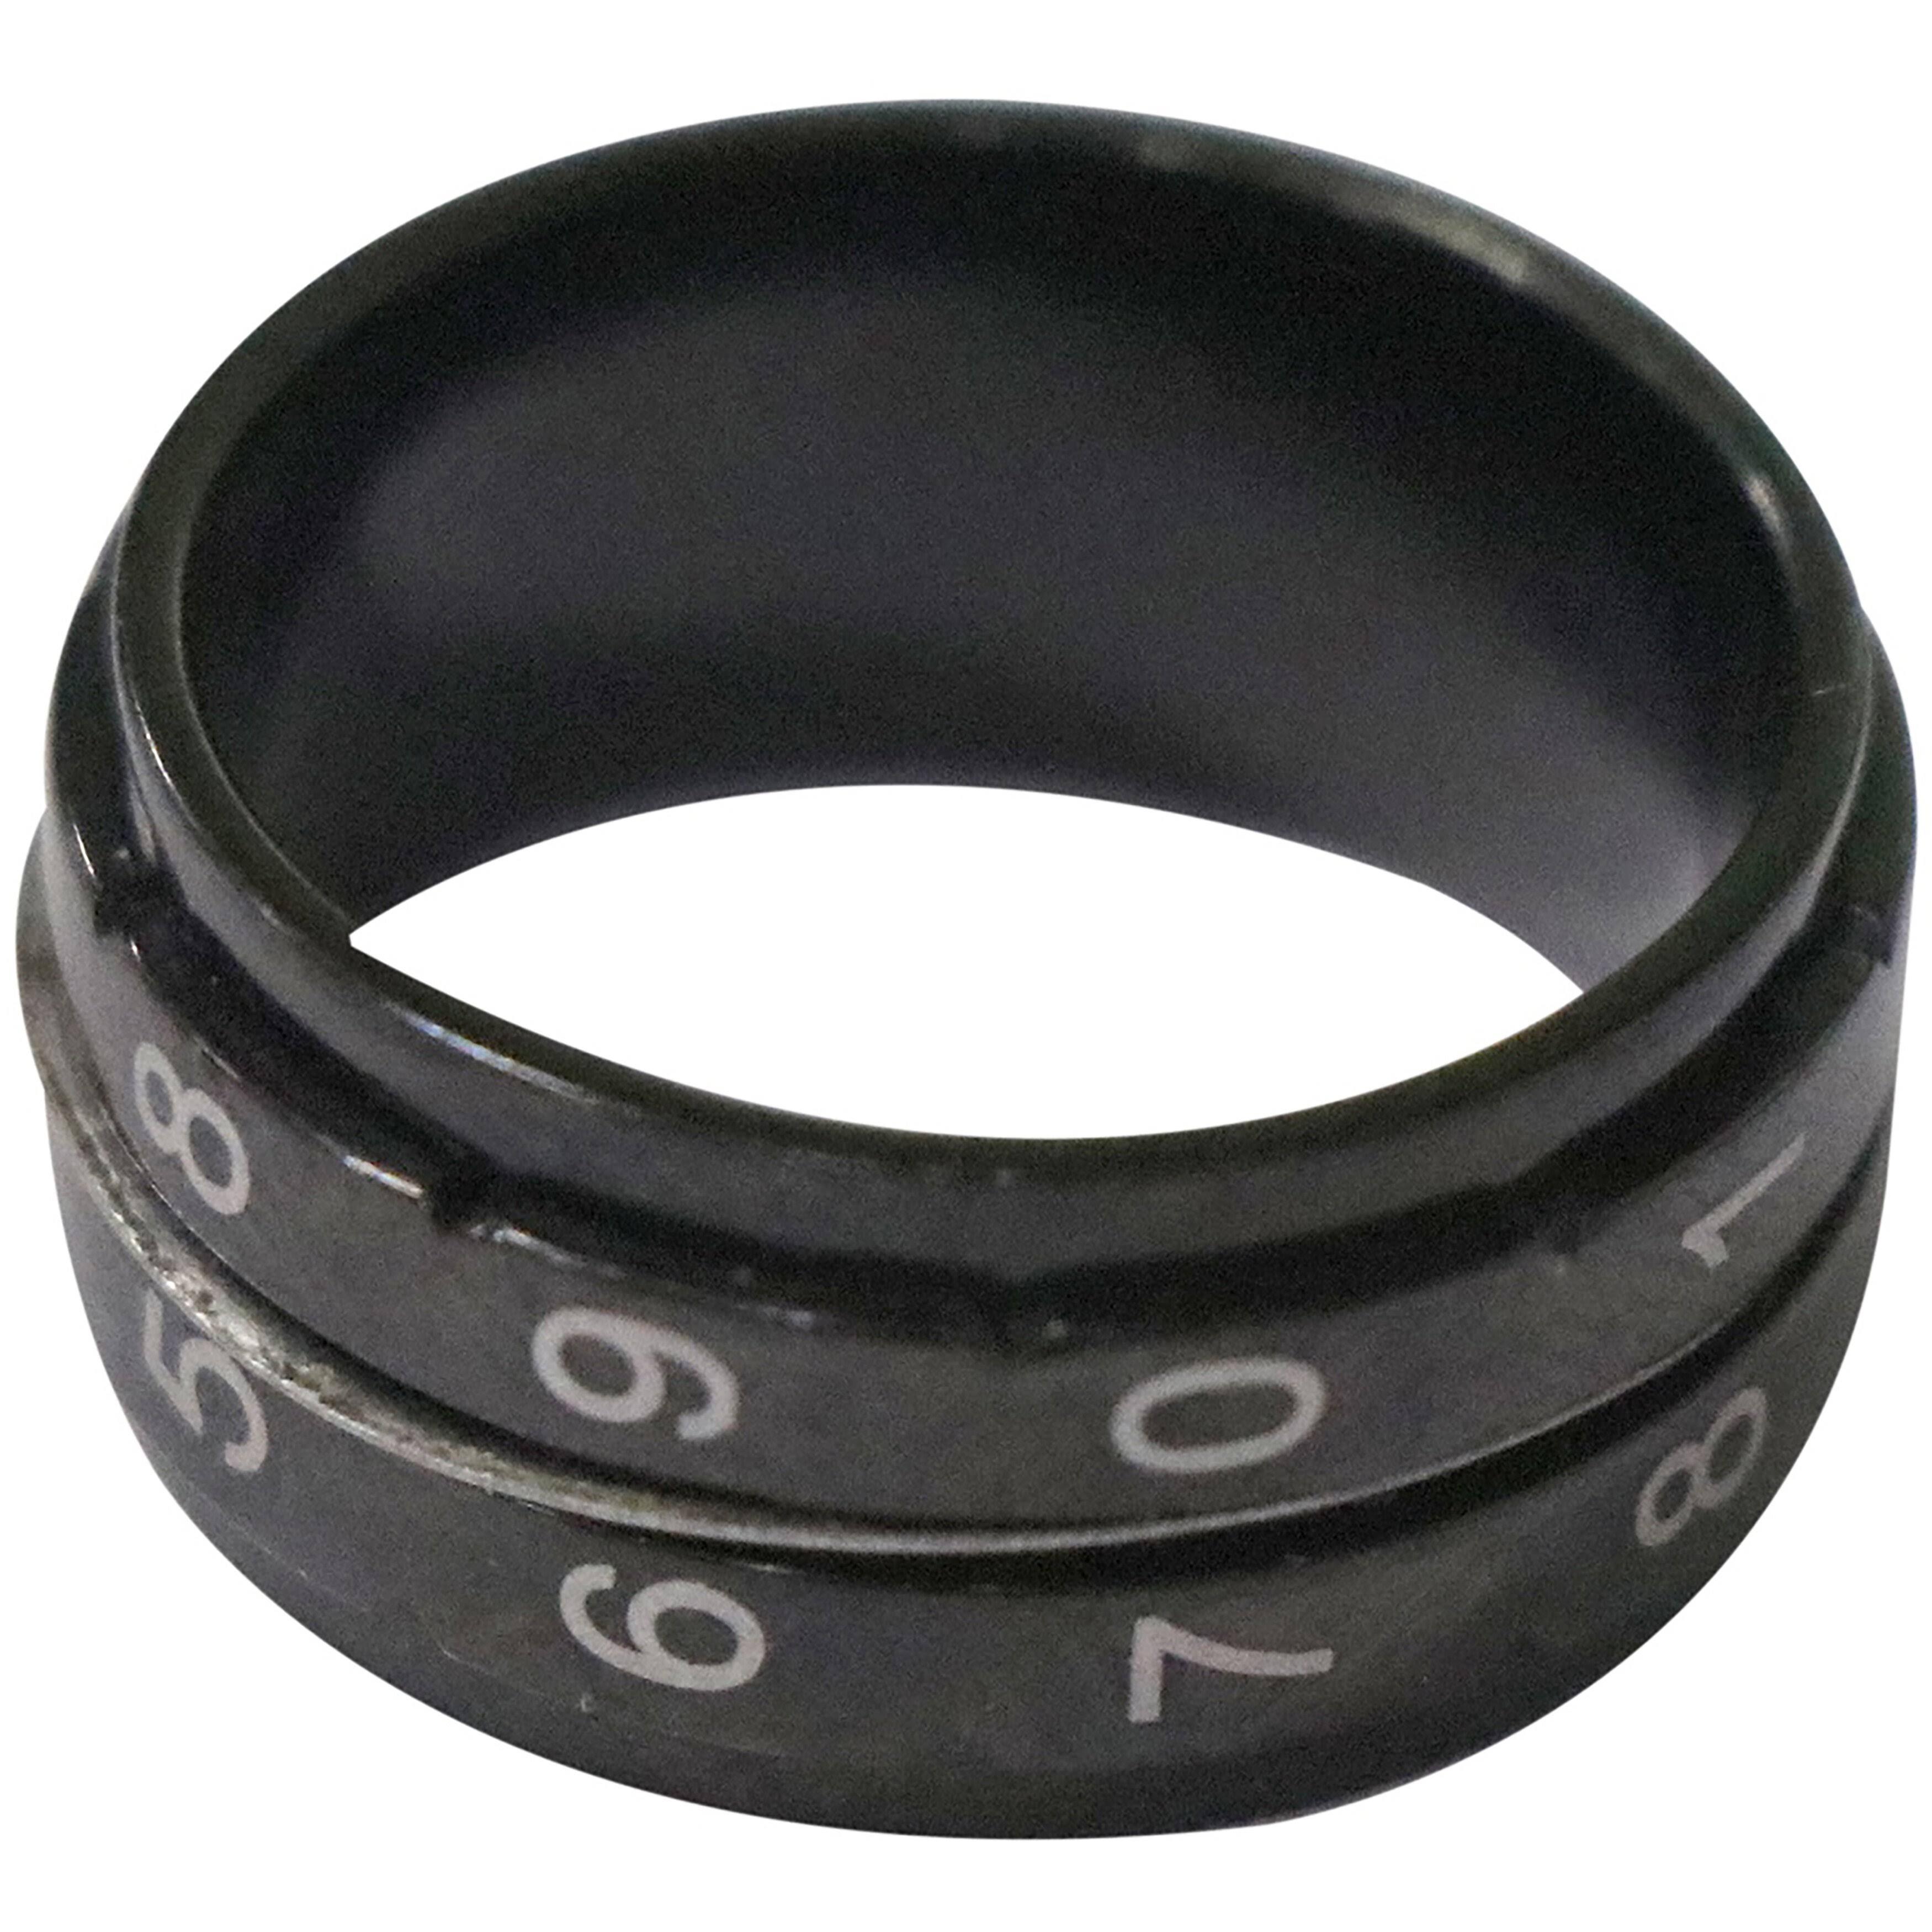 Knitter's Pride Row Counter Ring-Size 11: 20.6mm Diameter